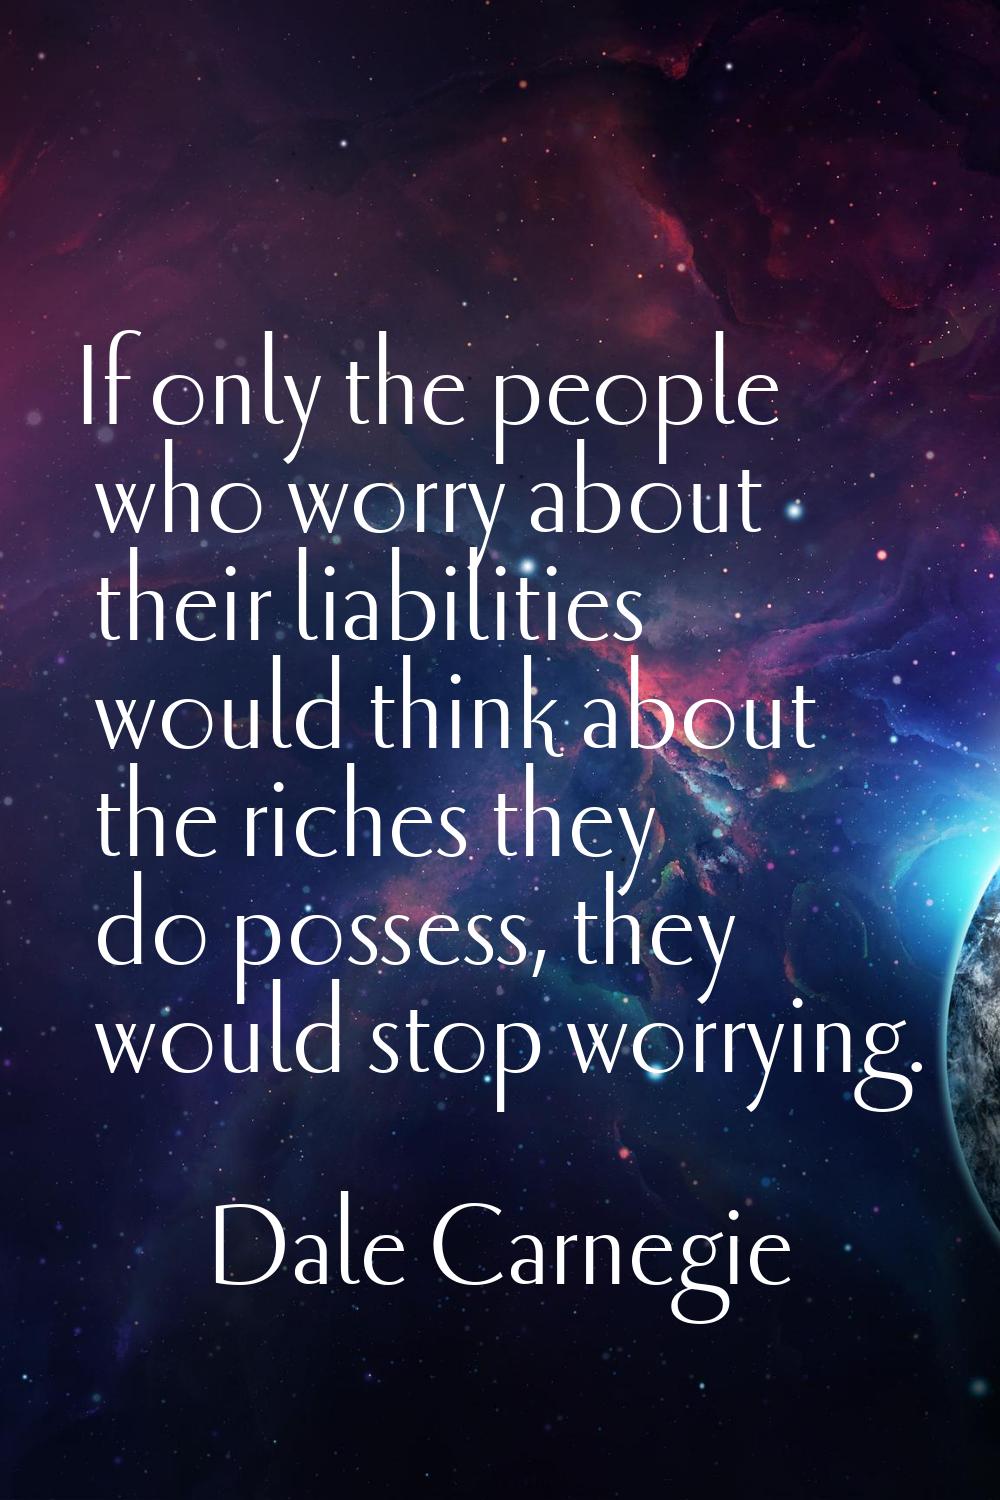 If only the people who worry about their liabilities would think about the riches they do possess, 